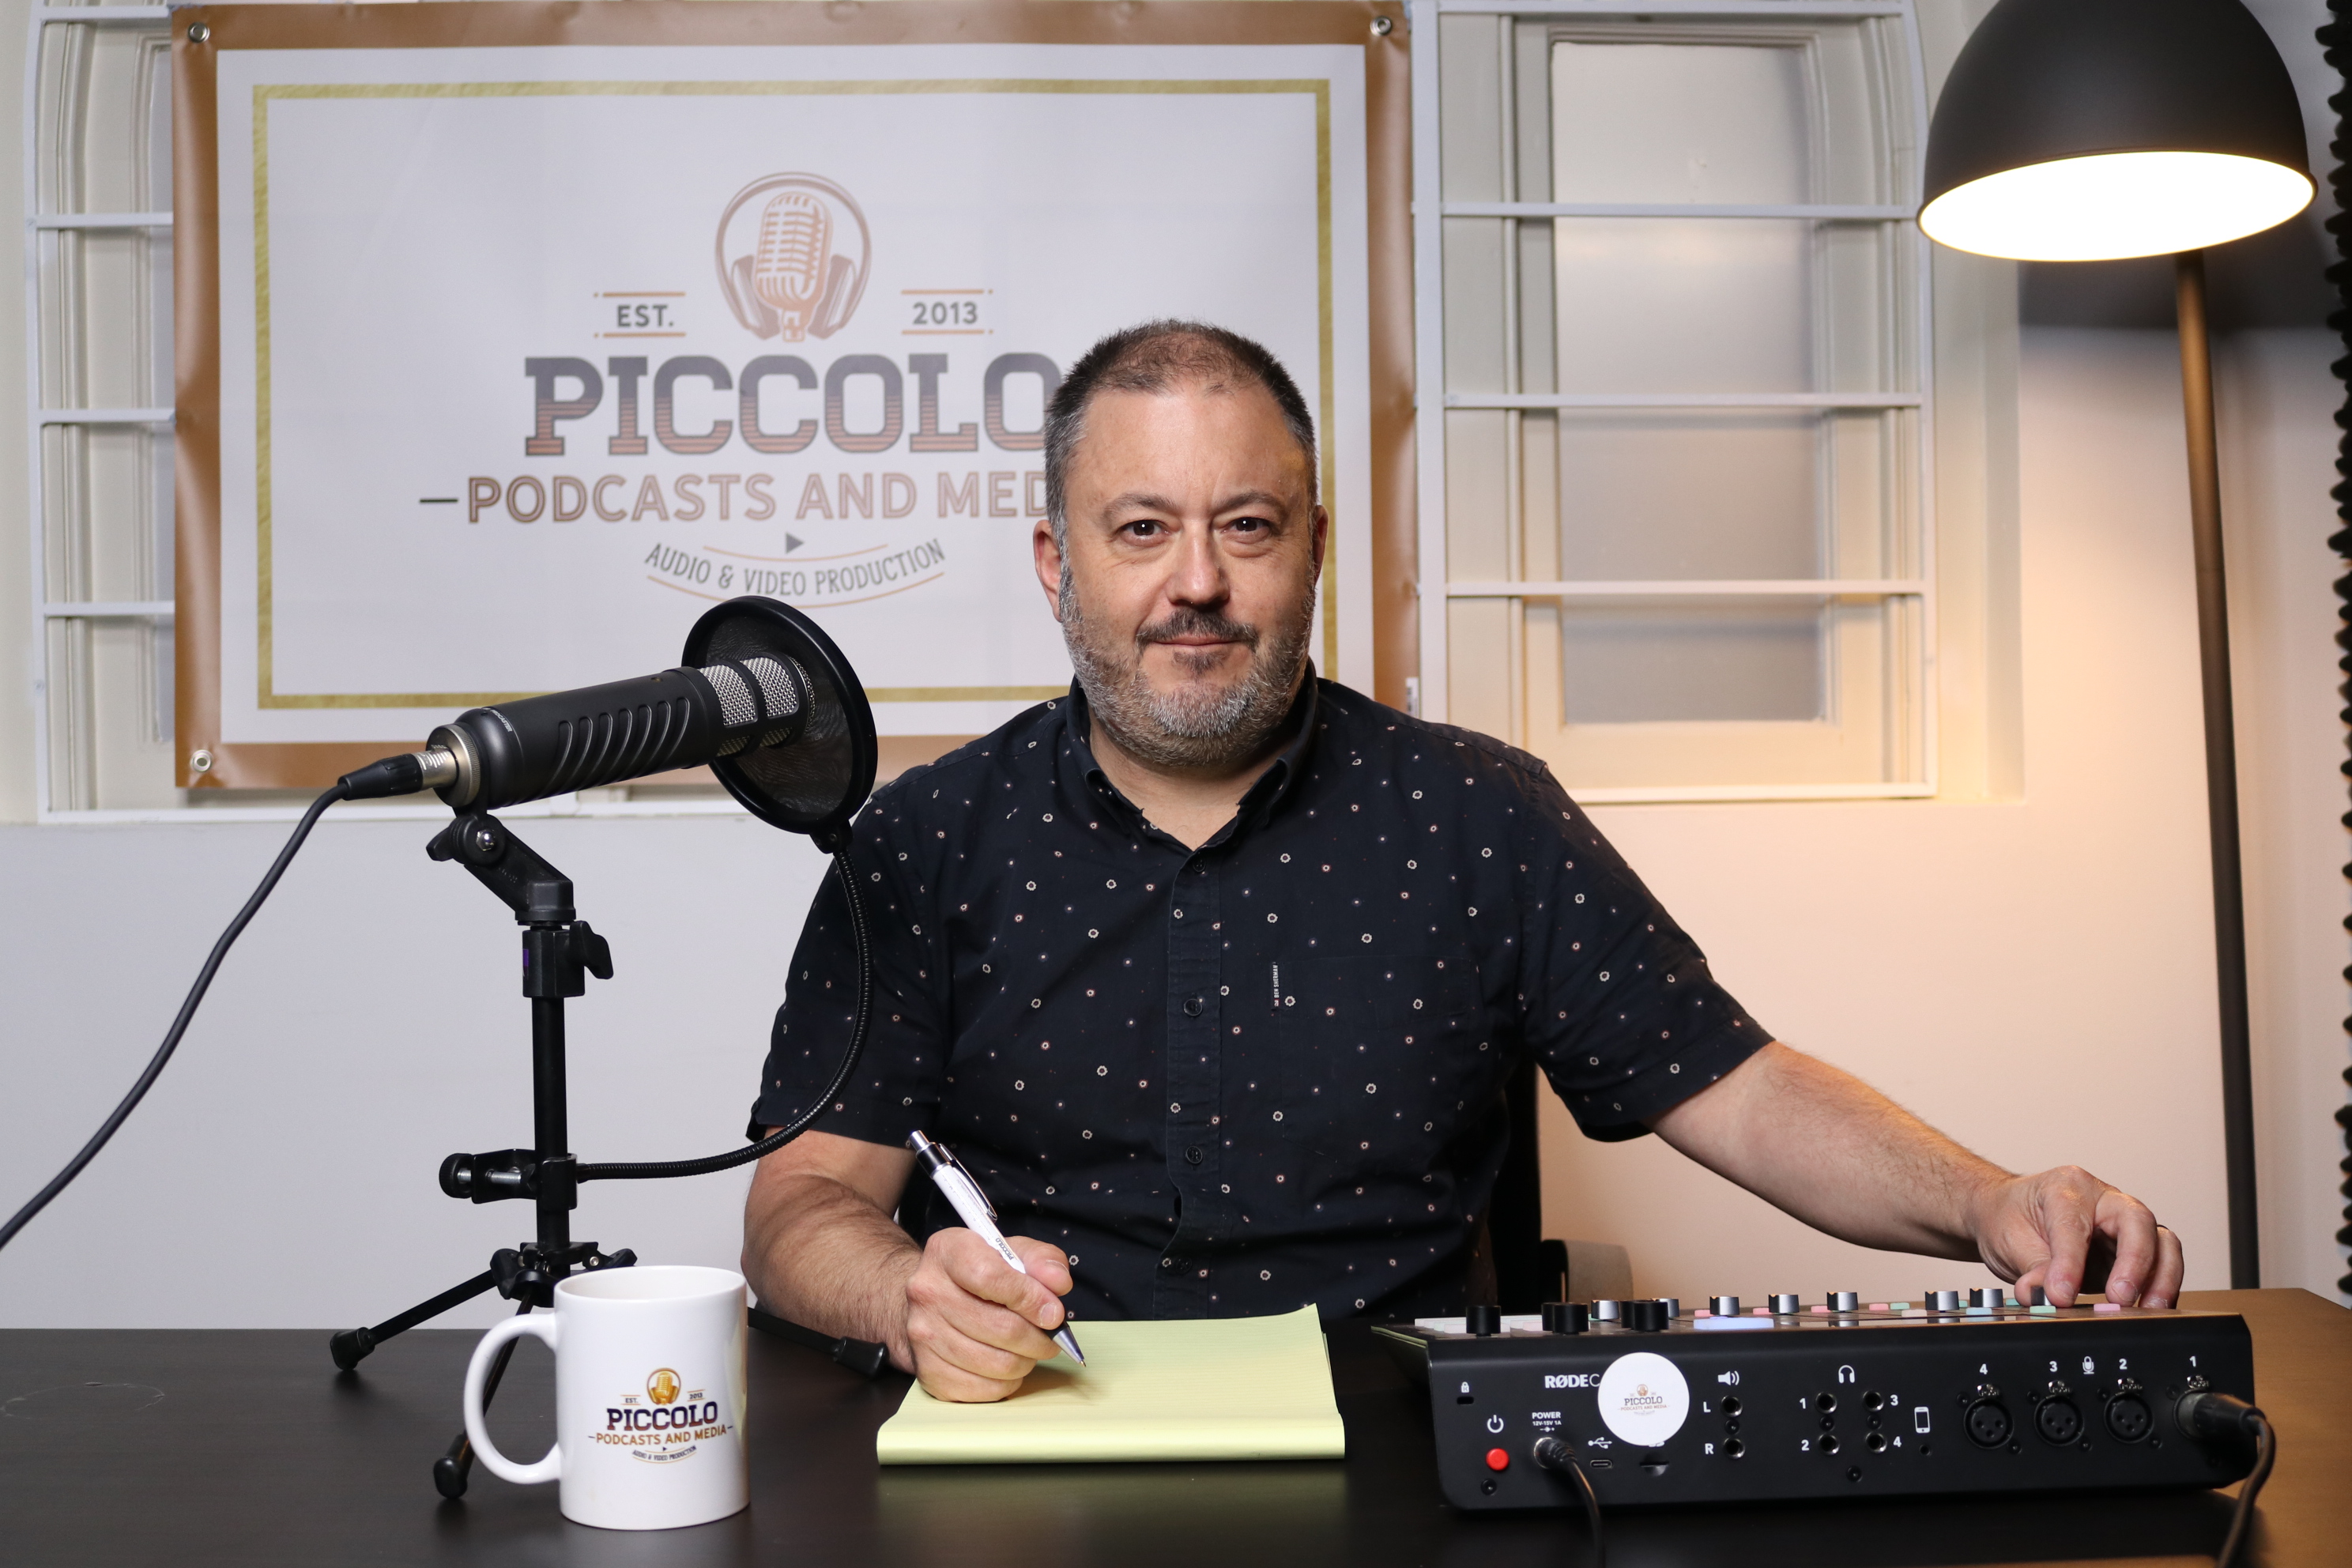 founder of piccolo podcasts